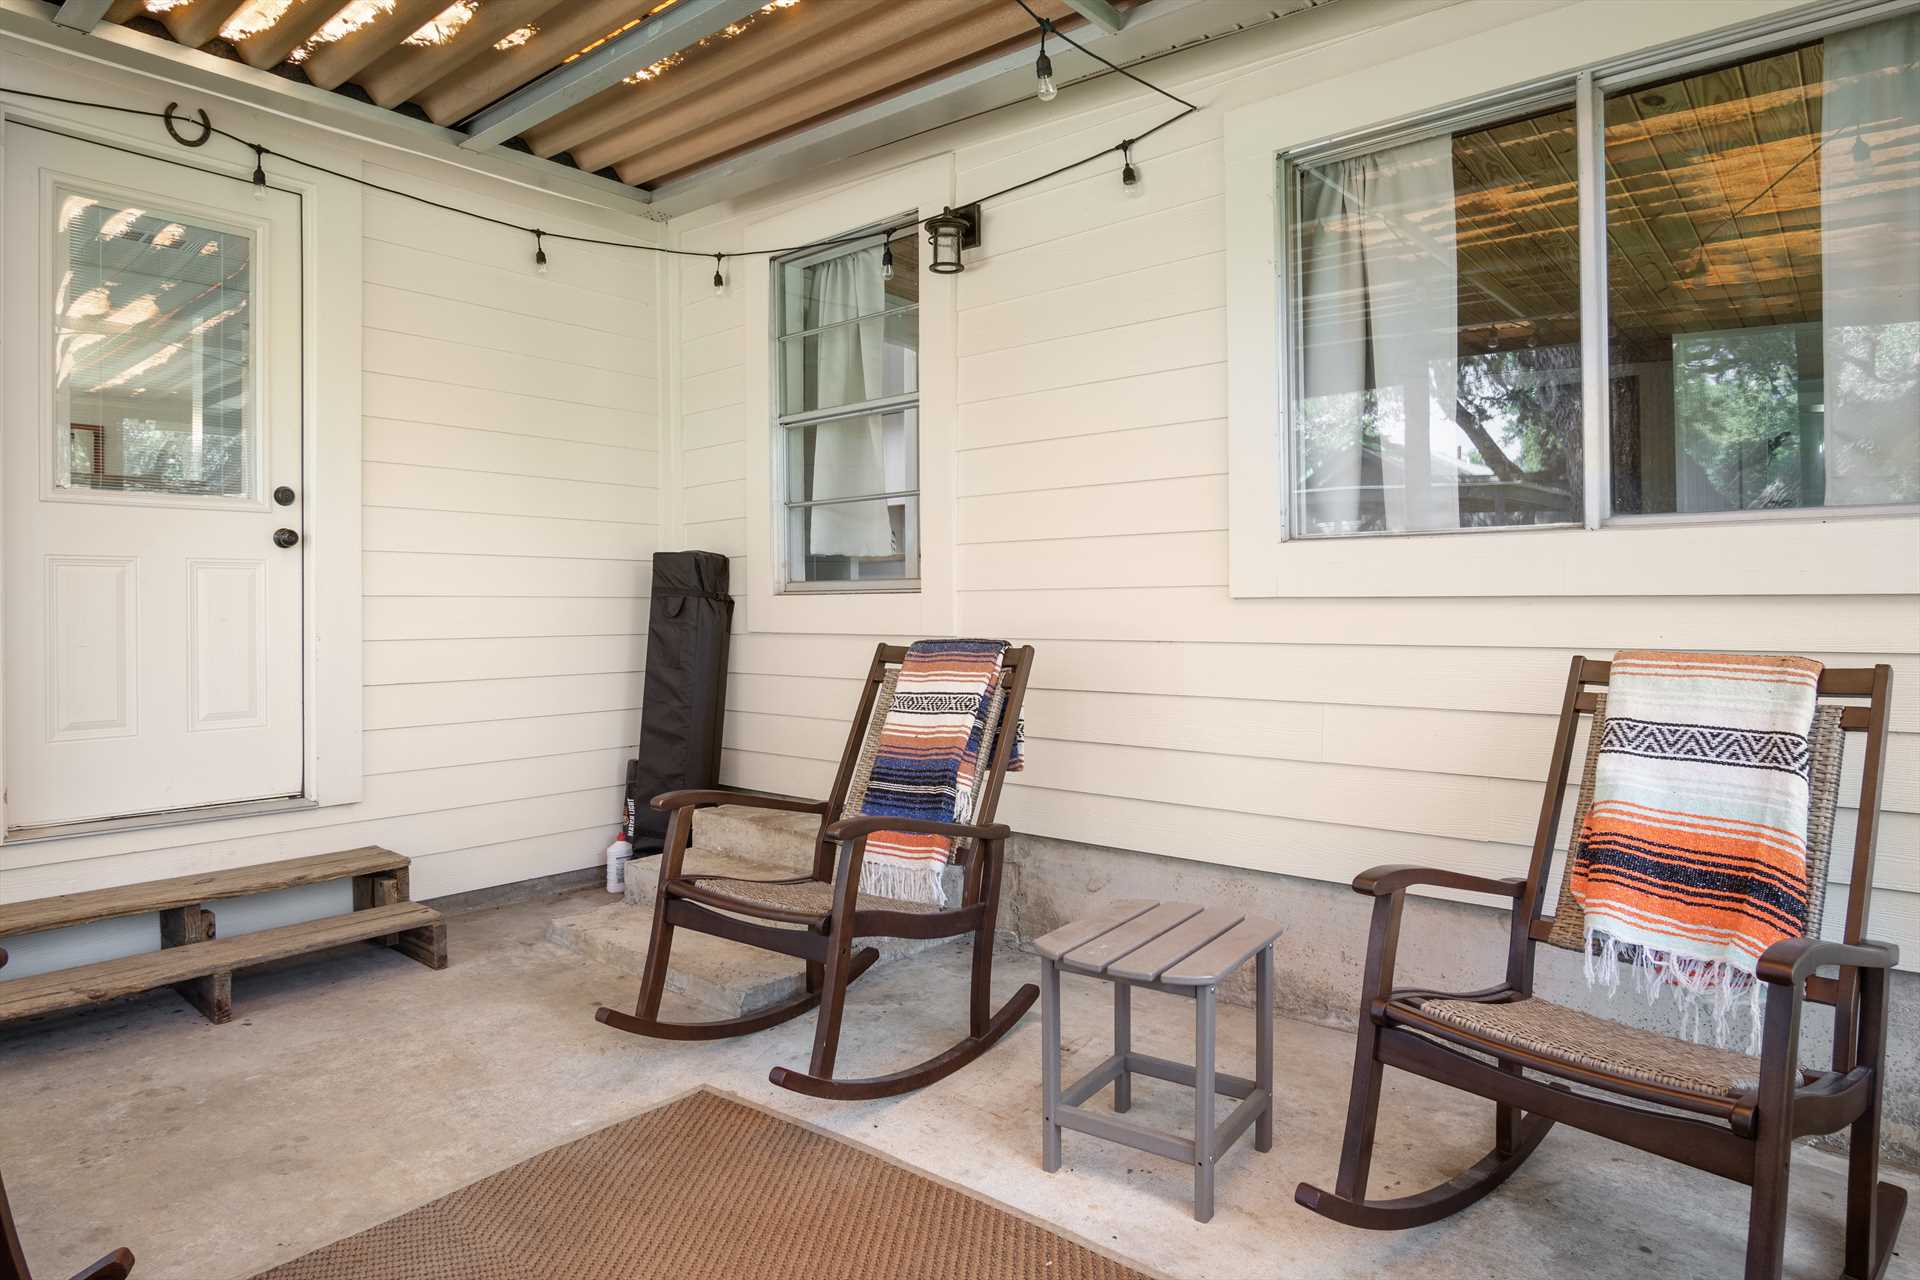                                                 You'll be comfortable inside and out! The shaded porch includes comfy furniture, and even glittering lights for atmosphere.